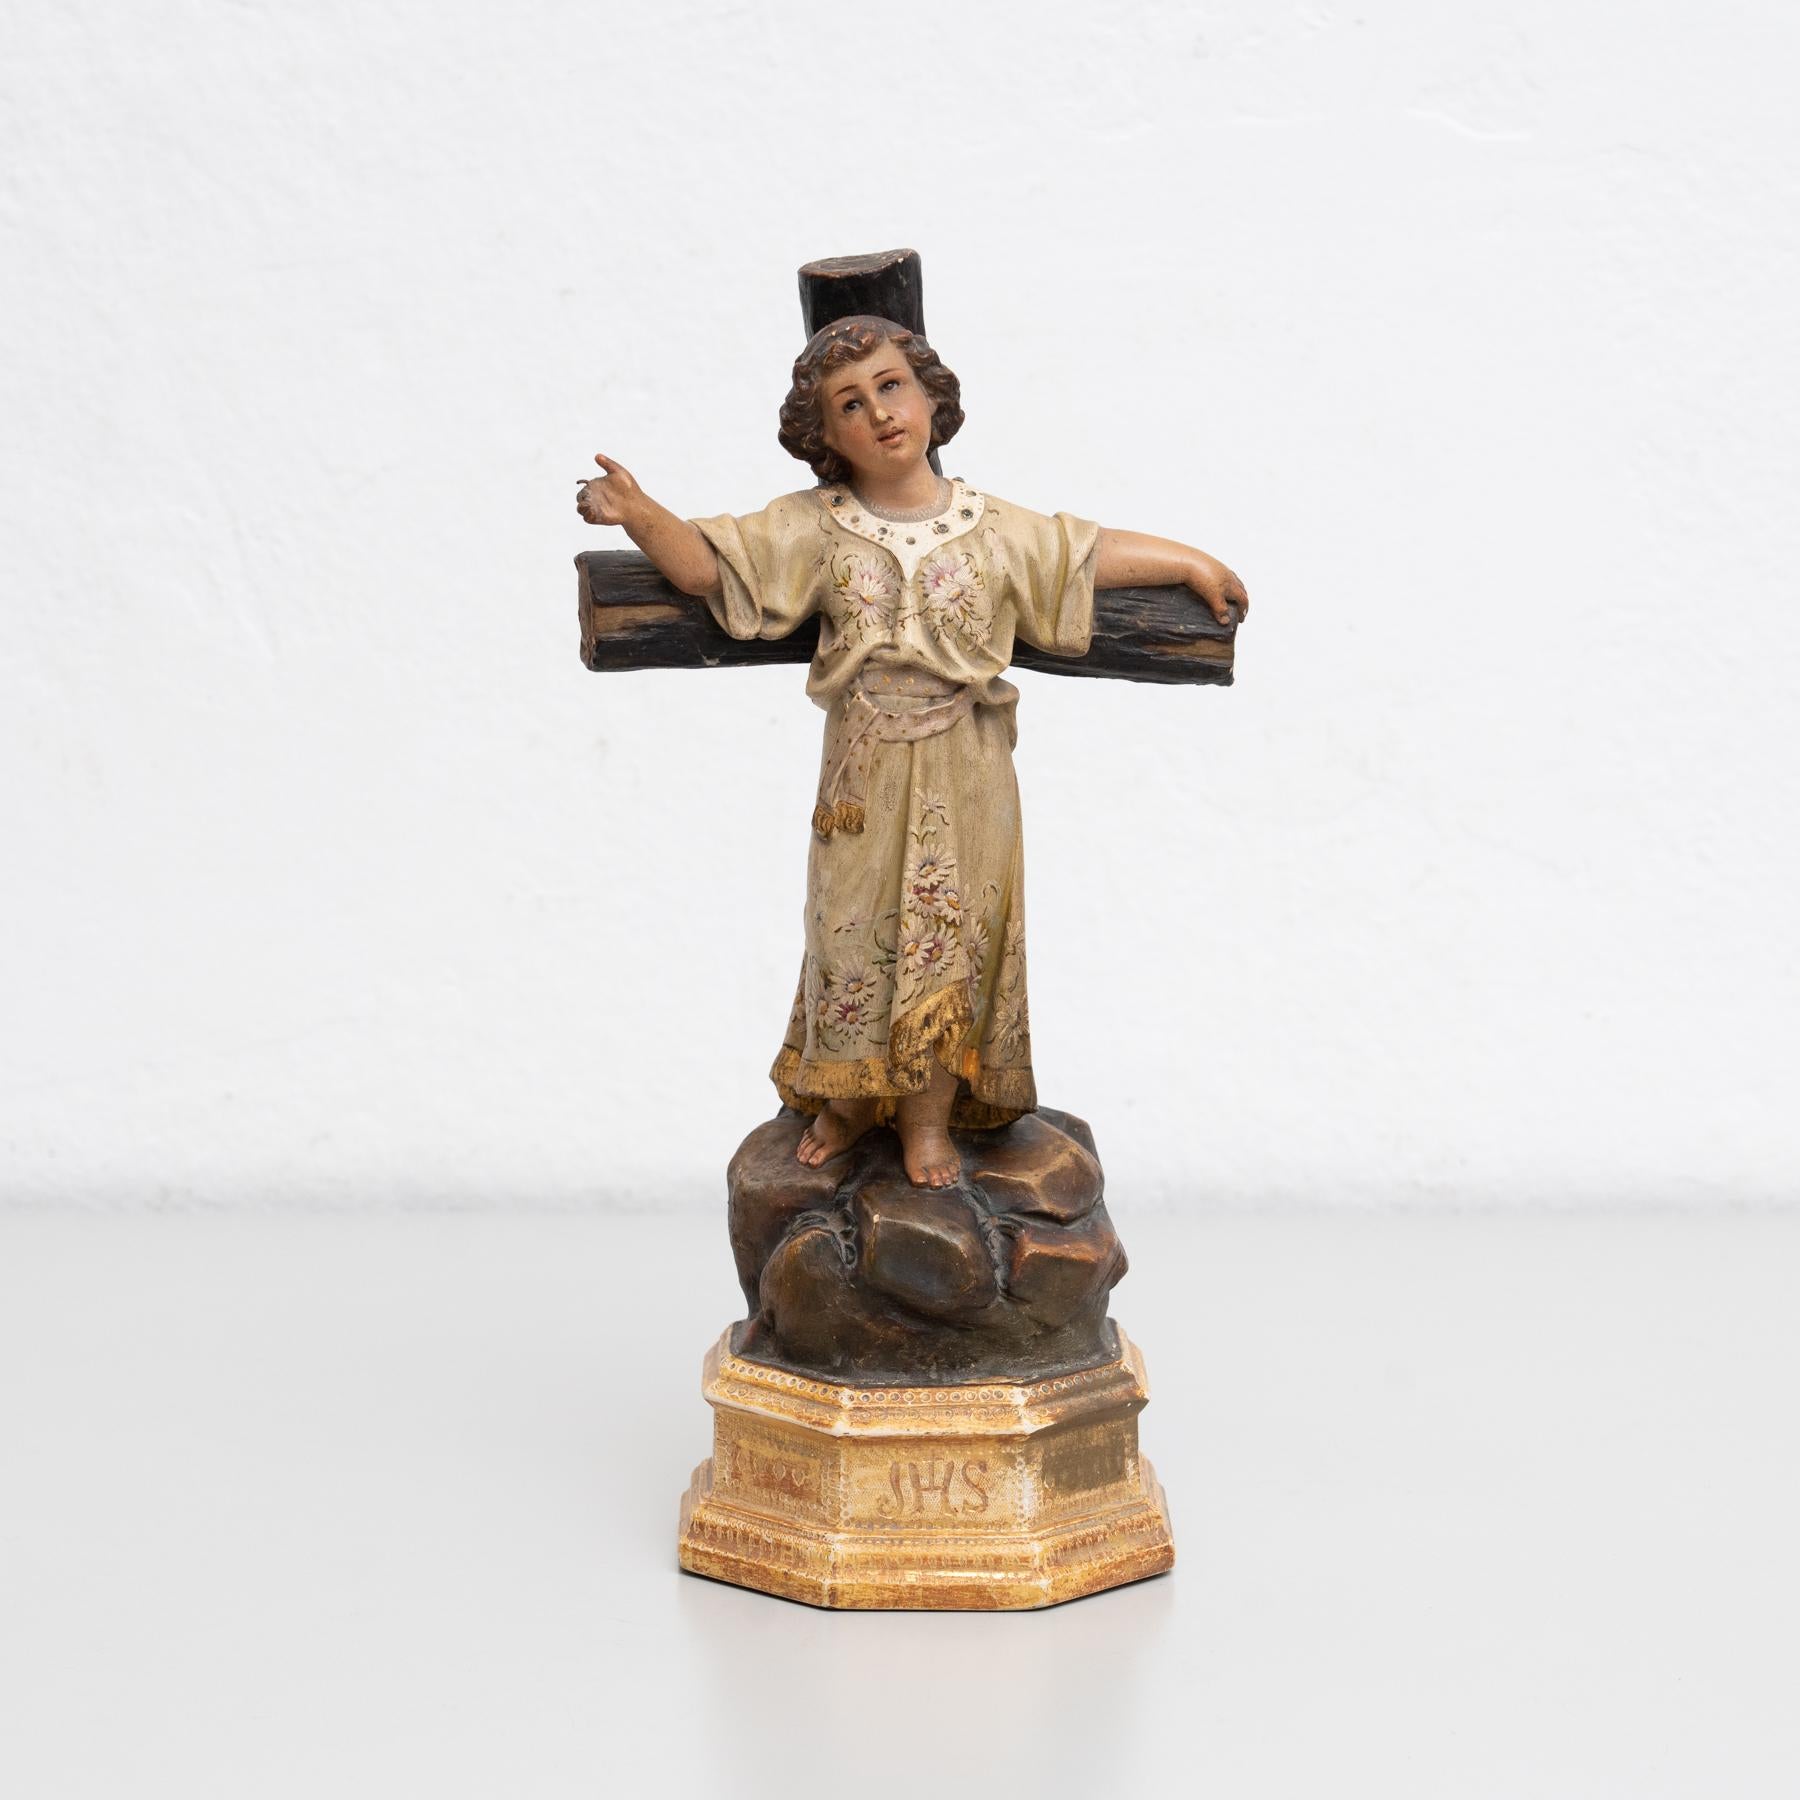 Traditional religious plaster figure of a baby Jesus.

Made in traditional Catalan atelier in Olot, Spain, circa 1930.

In original condition, with minor wear consistent with age and use, preserving a beautiful patina.

Materials:
Plaster.
 